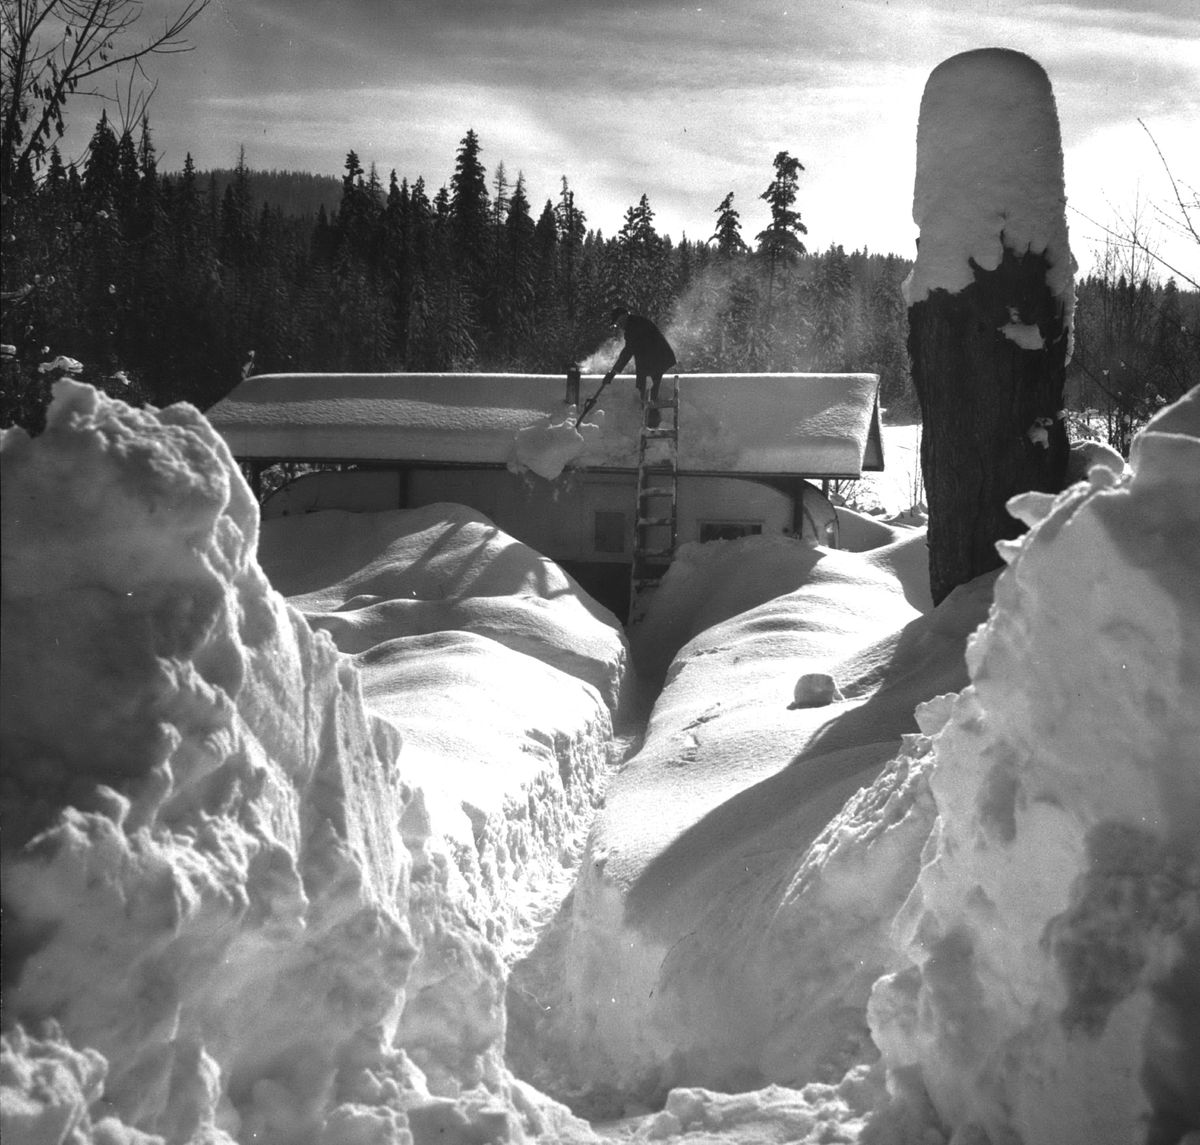 A man shovels snow off a roof covering a camper trailer surrounded by snow in 1969. (PHOTO ARCHIVE / SR)